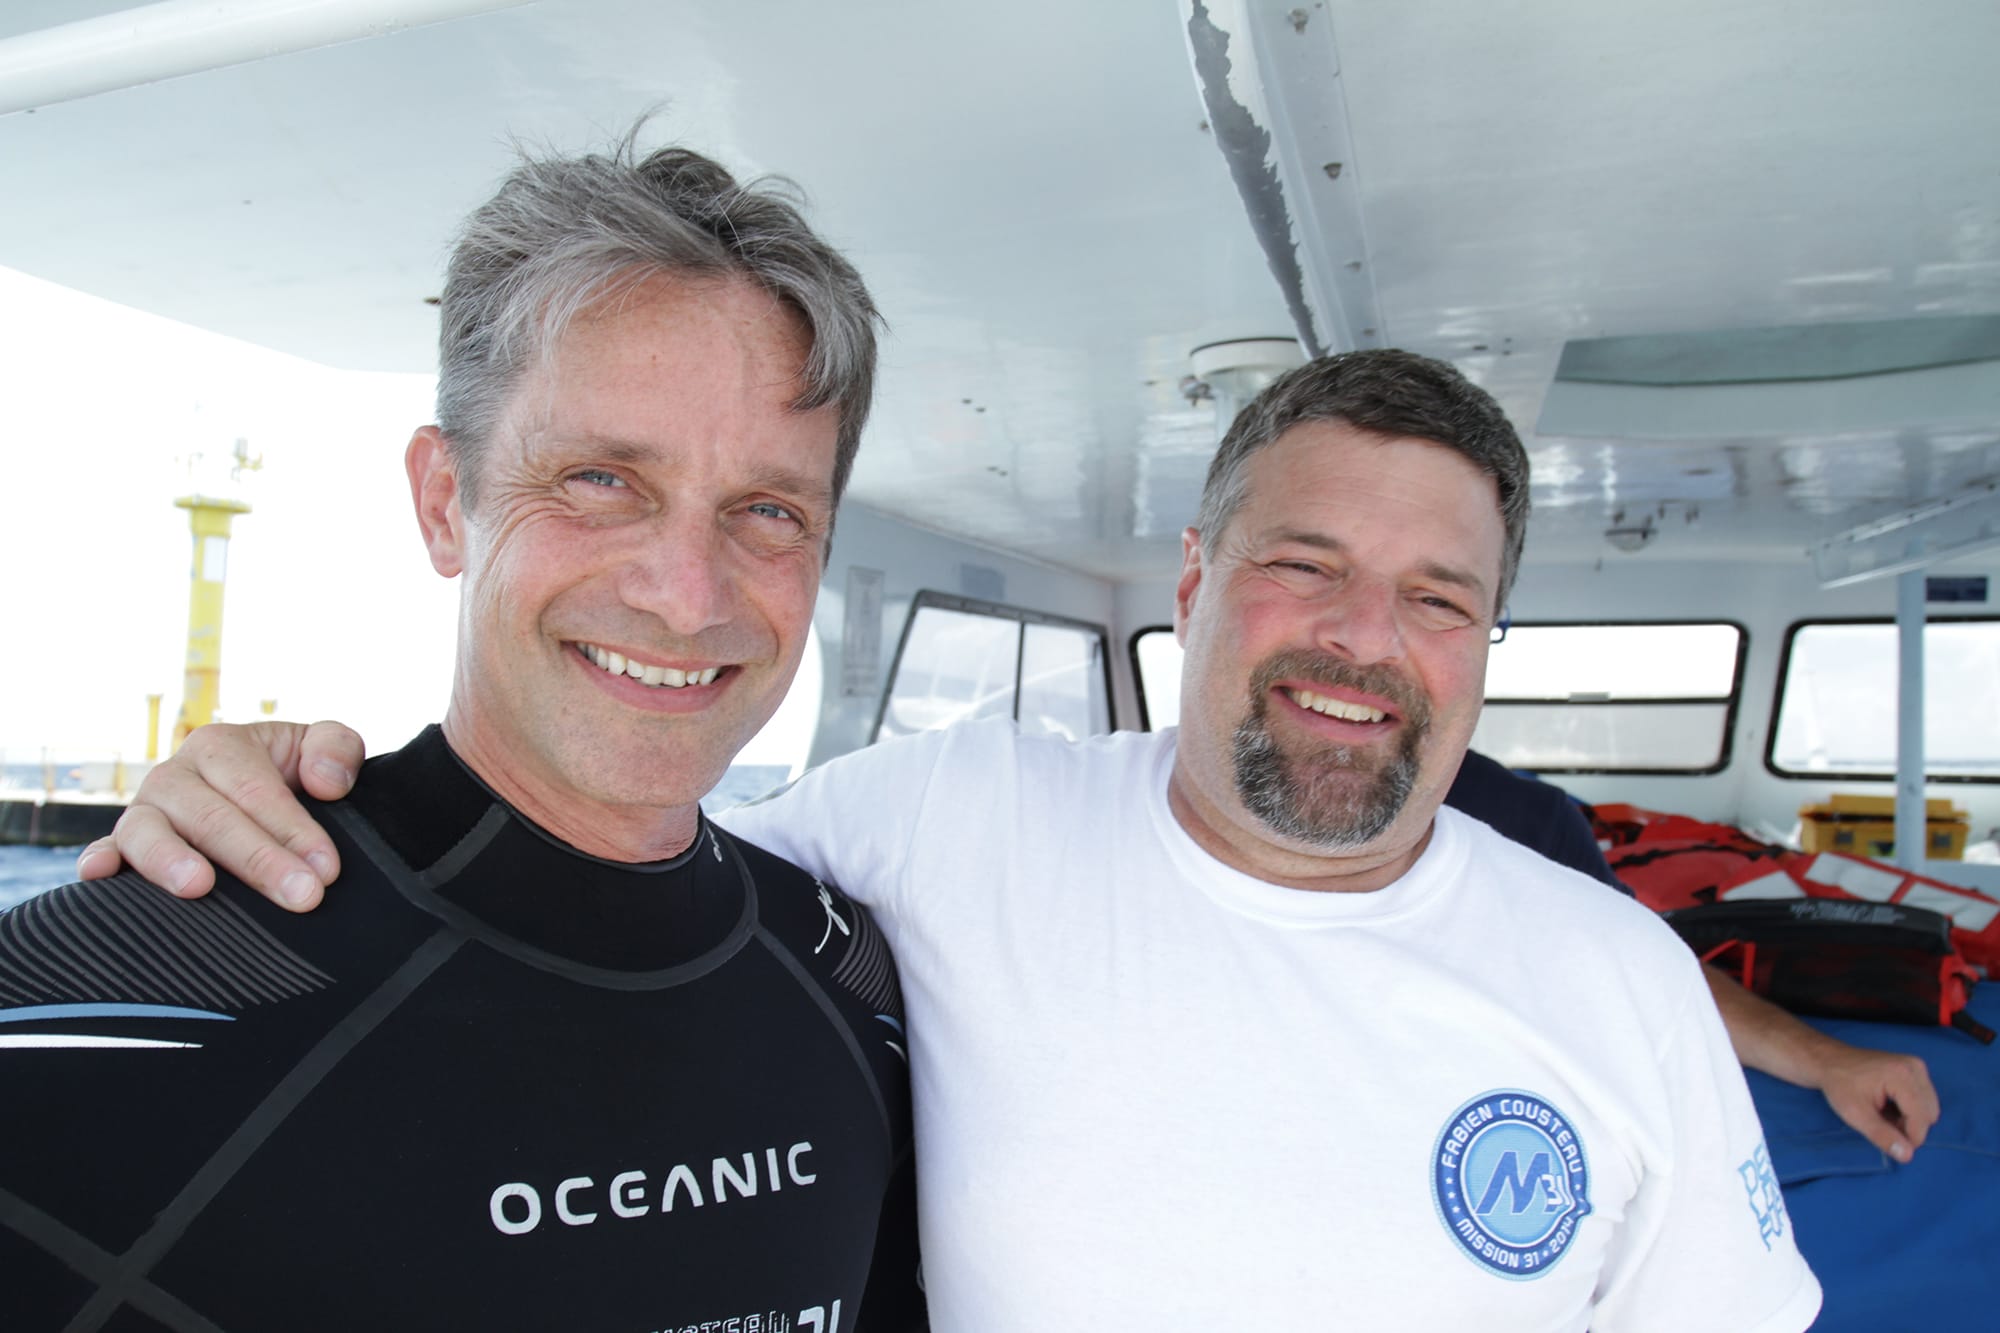 Courtesy of Billy Snook and Marc Ostrick
Fabien Cousteau, left, with Vancouver diver Billy Snook during the production of Mission 31. Cousteau, grandson of Jacques Cousteau, is living underwater continuously for 31 days in the Aquarius, a research lab off the coast of Florida.